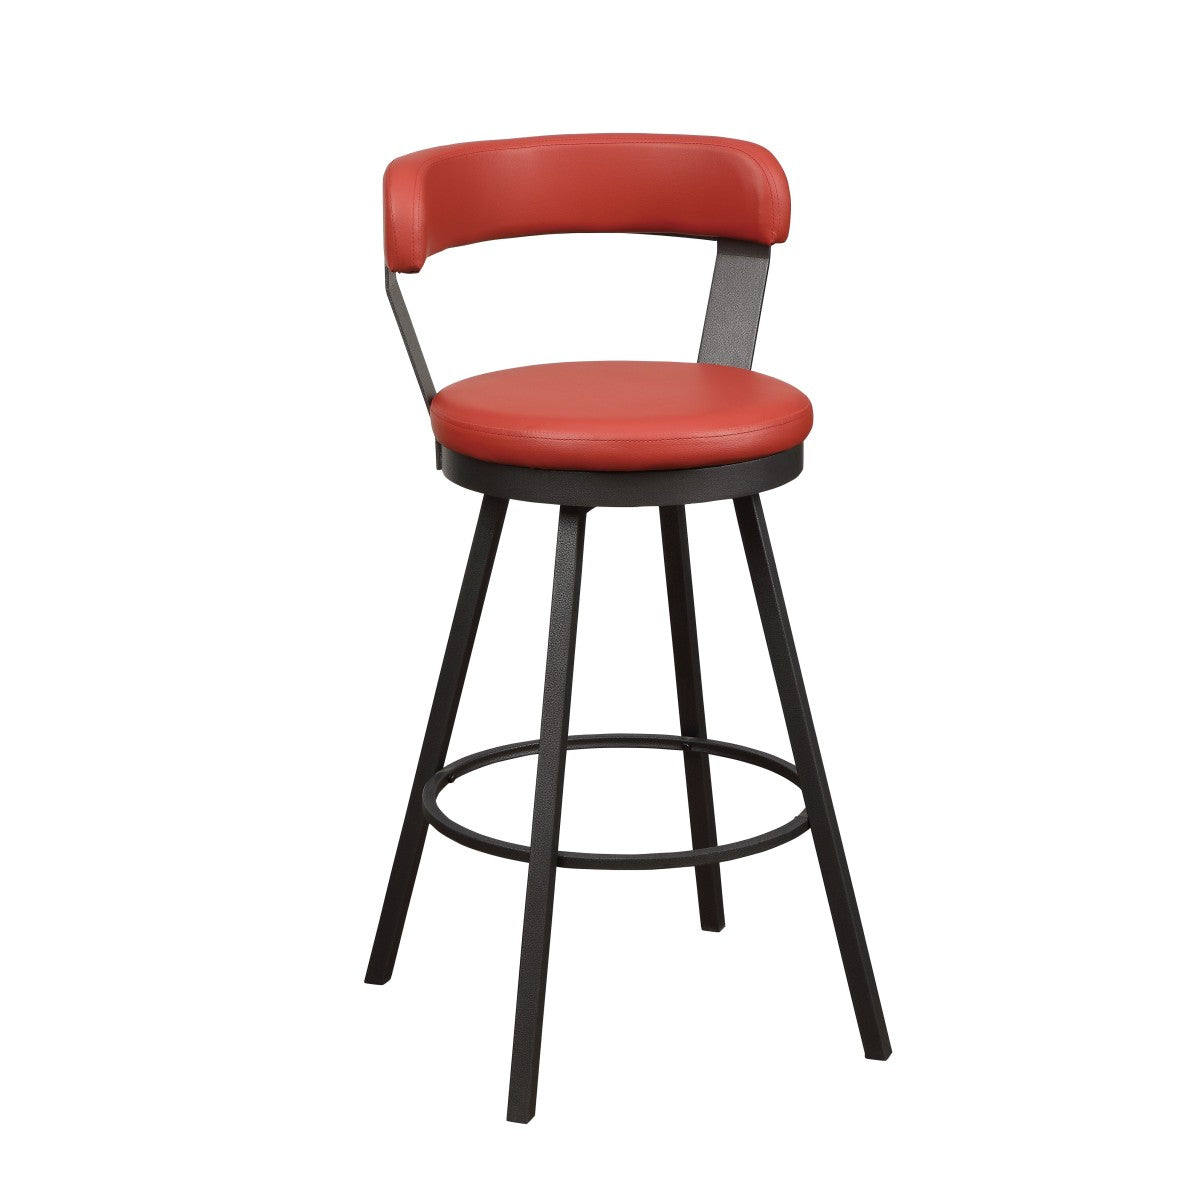 Swivel Pub Chair Red 5566-29RD (Set of 2)